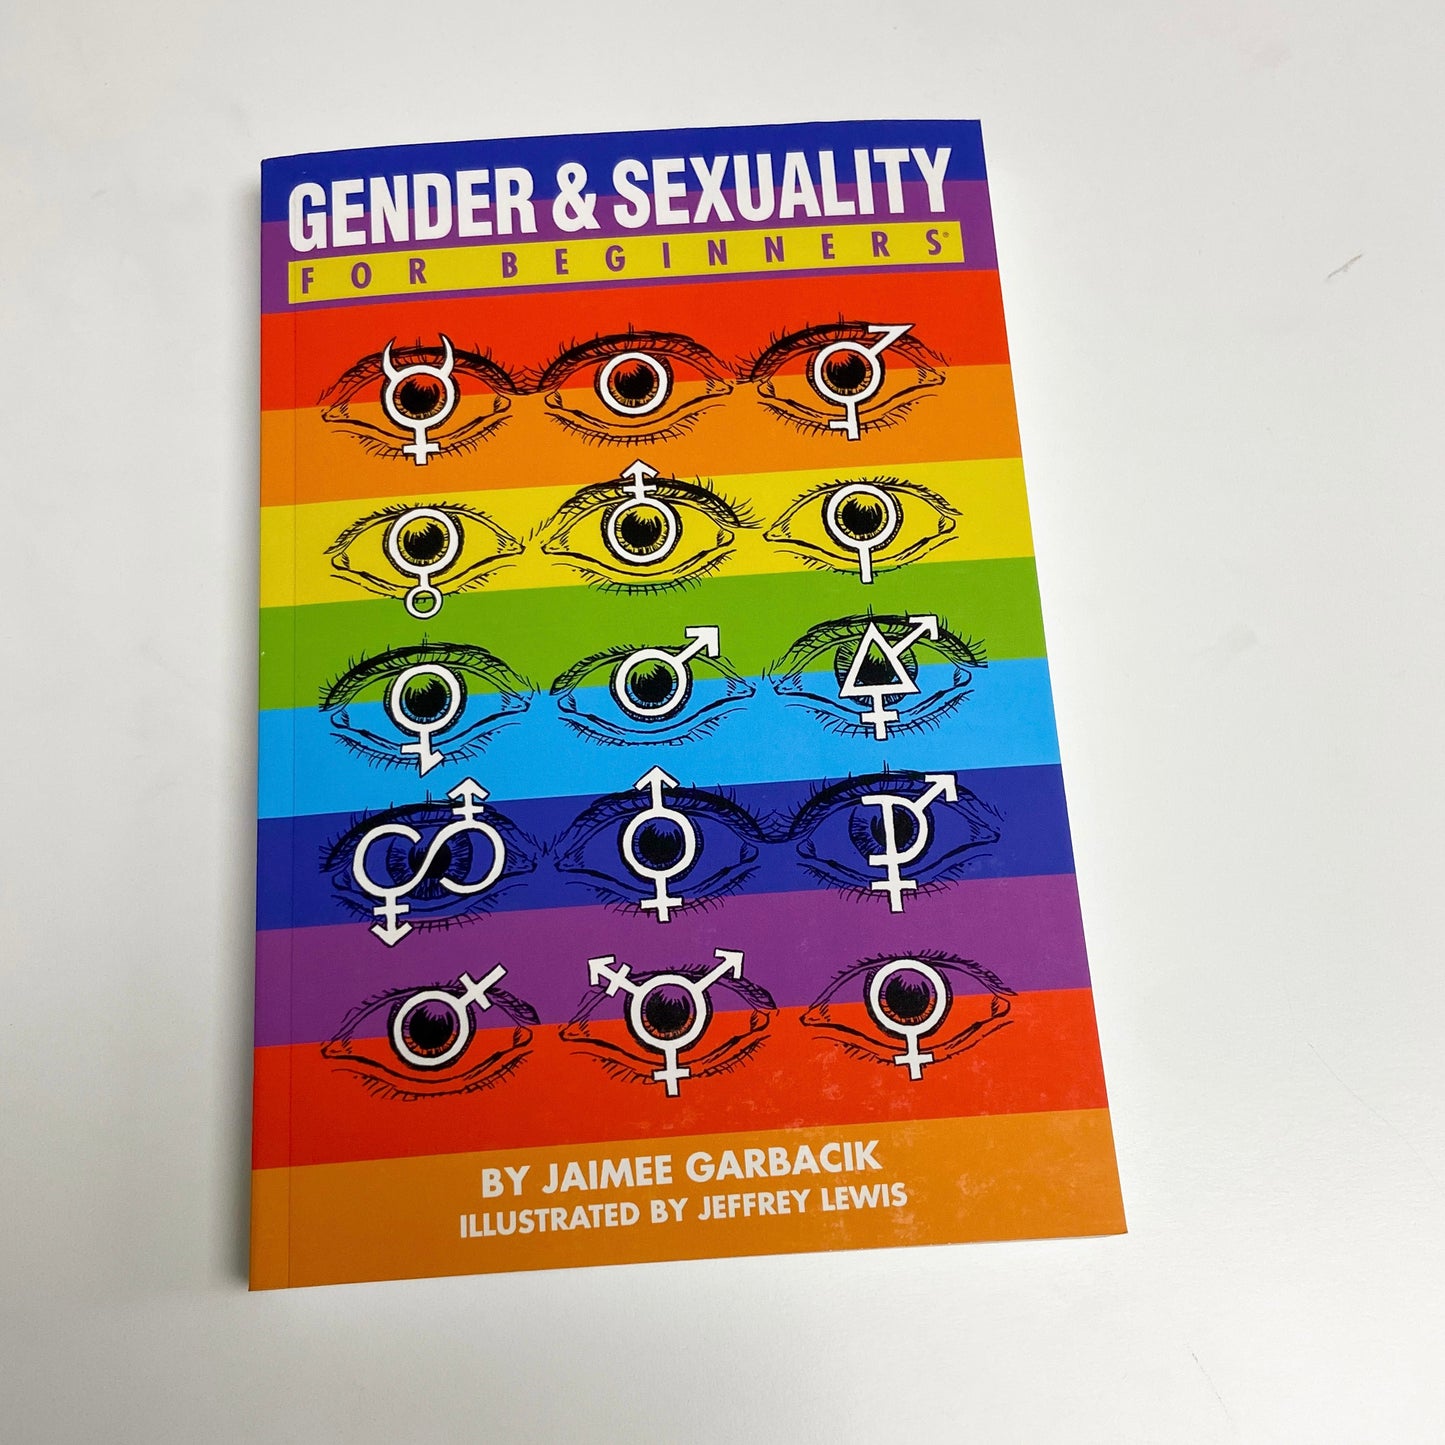 Gender & Sexuality For Beginners